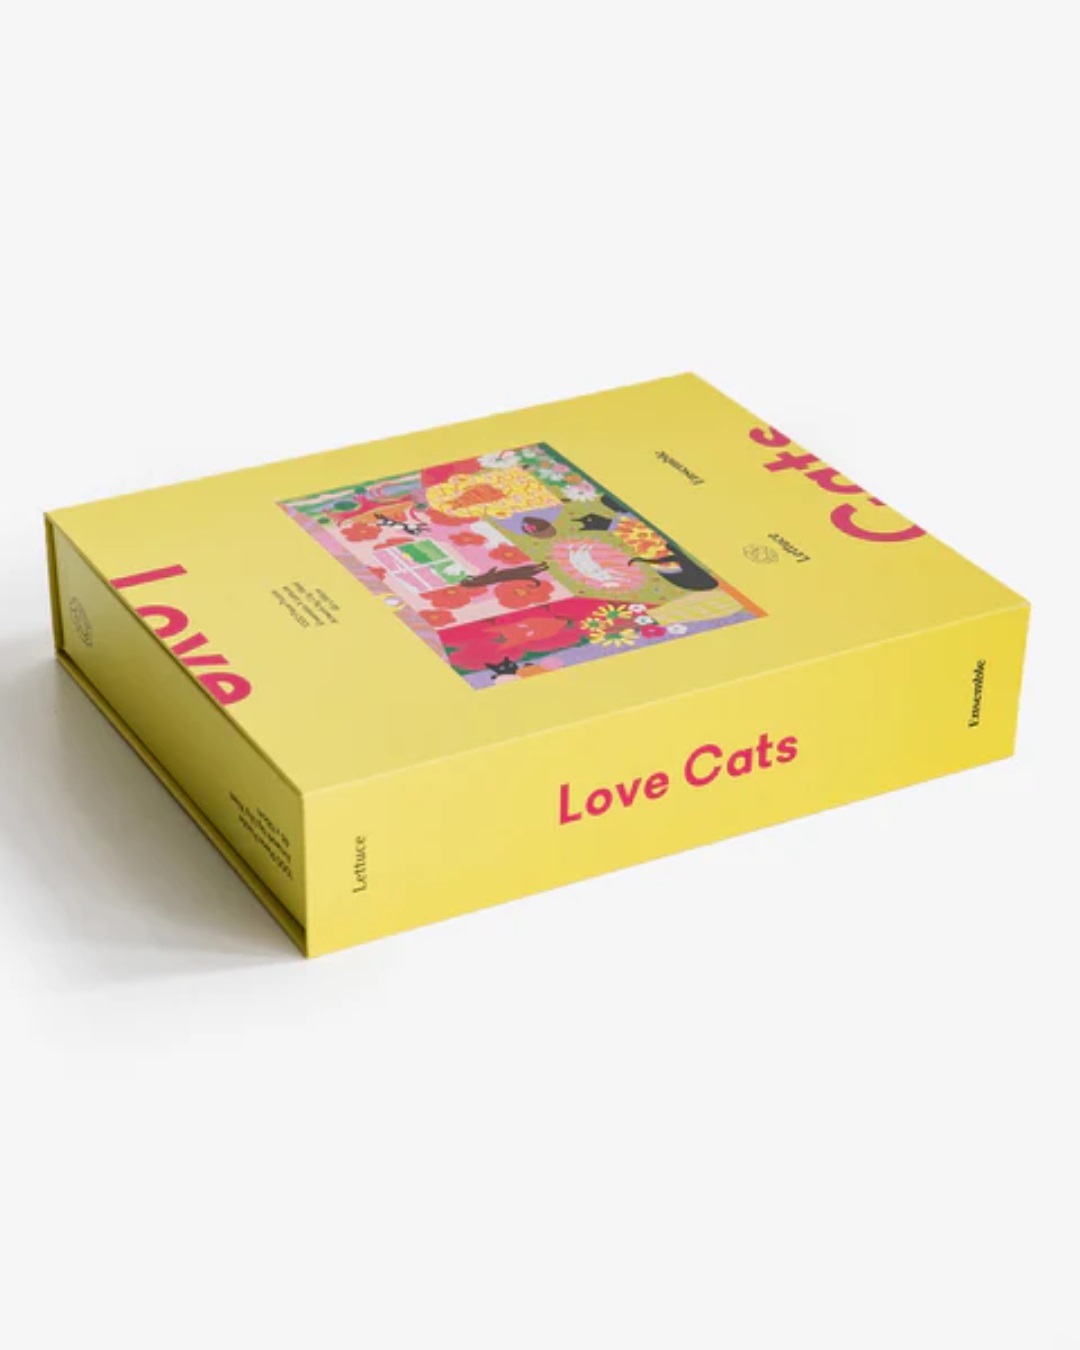 Cats puzzle in yellow box